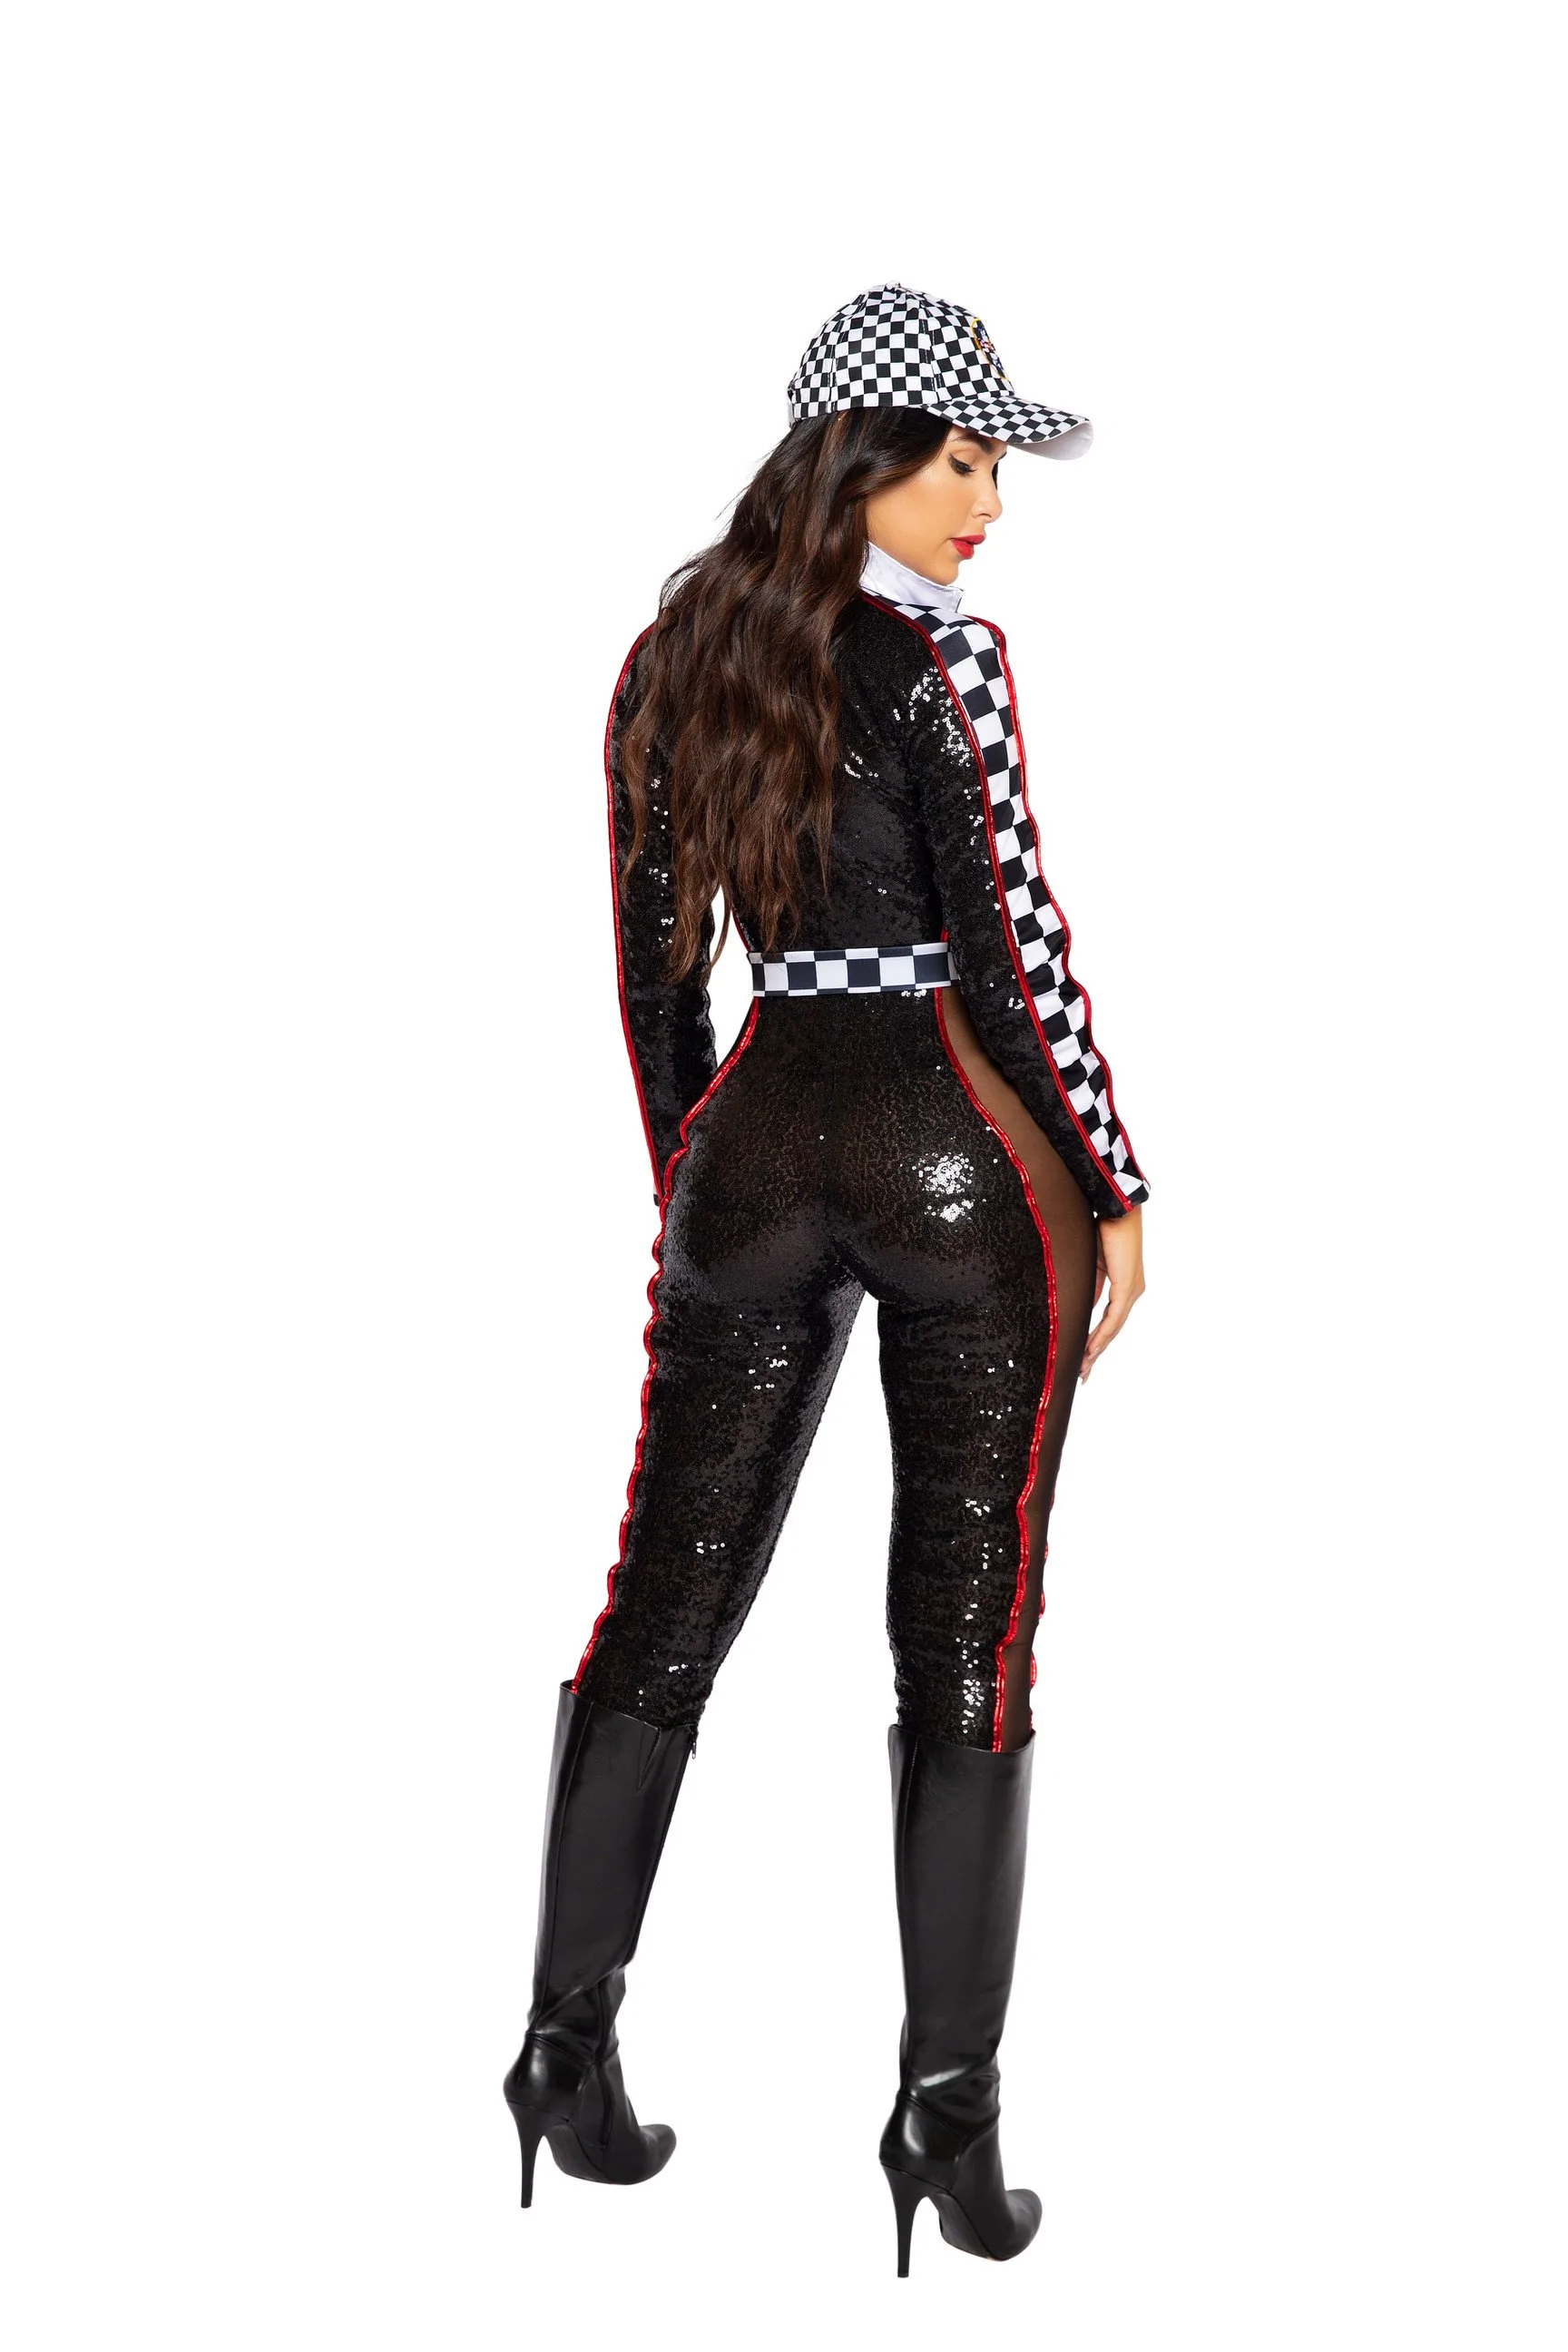 1PC Sexy Racer Driver Babe Costume Back View